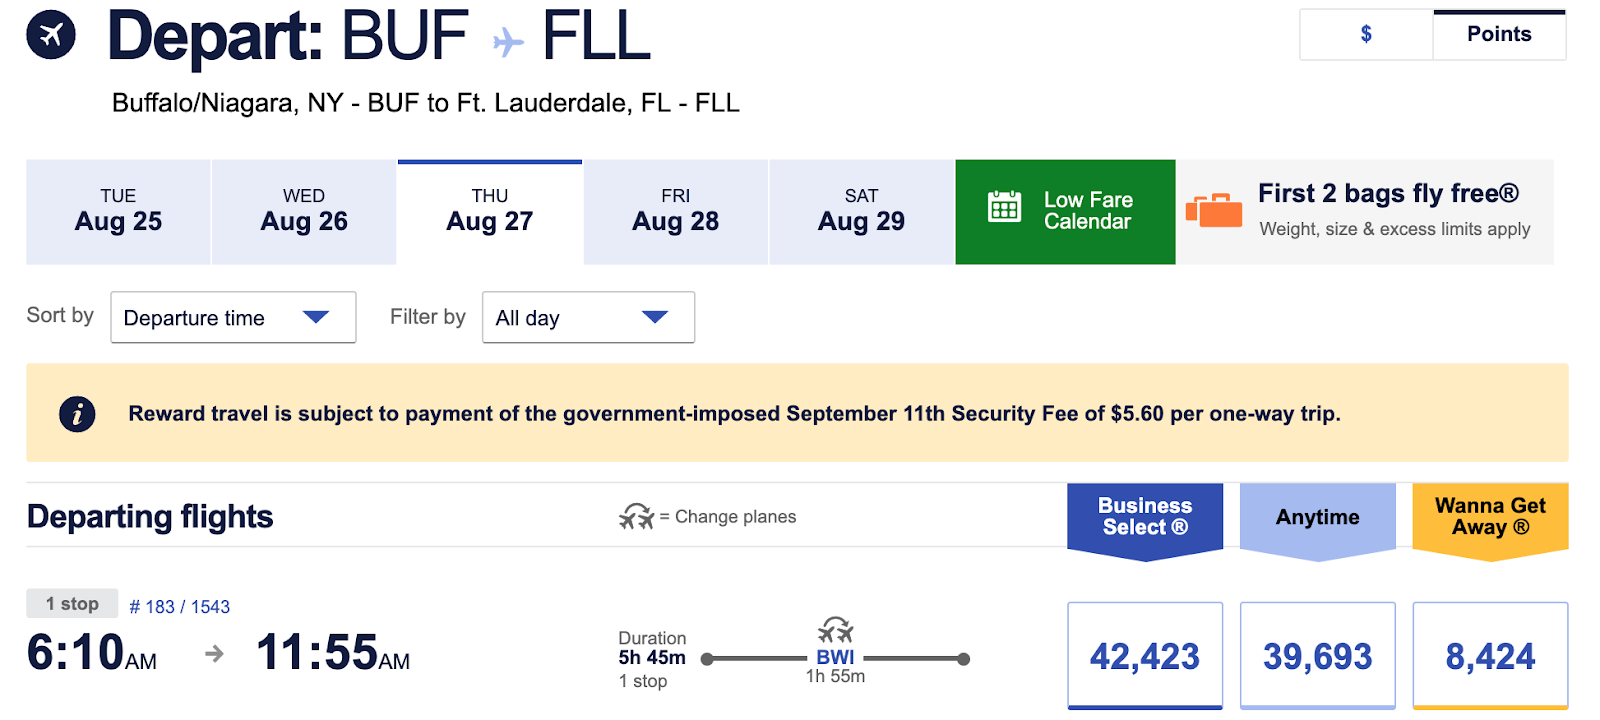 Screenshot of Southwest Flight booking from BUF-FLL for 8,424 wanna getaway fare